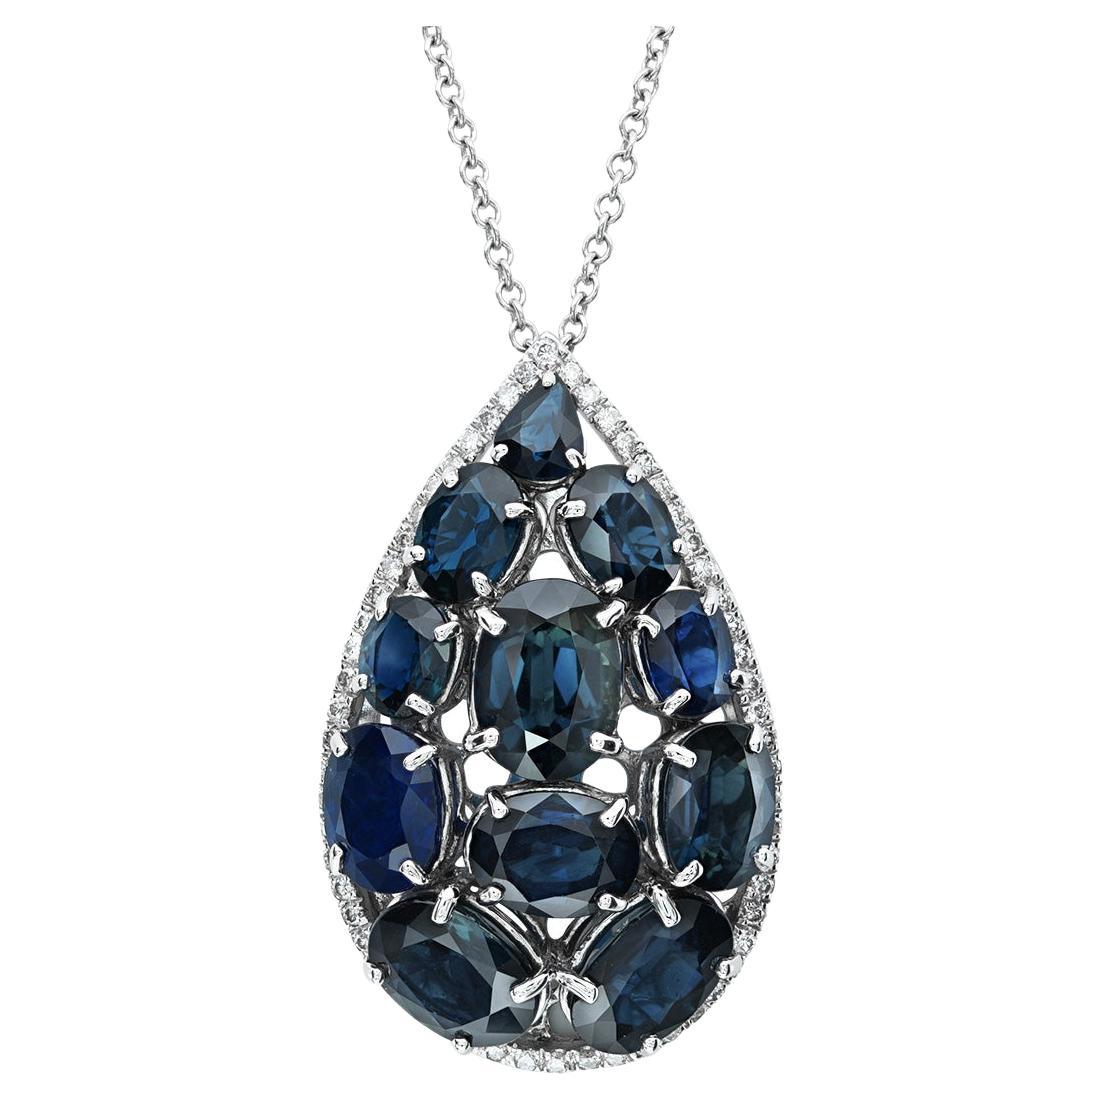 16.50Ct Natural Blue Sapphires Diamond 18K White Gold Necklace, Jewelry Sapphire For Sale